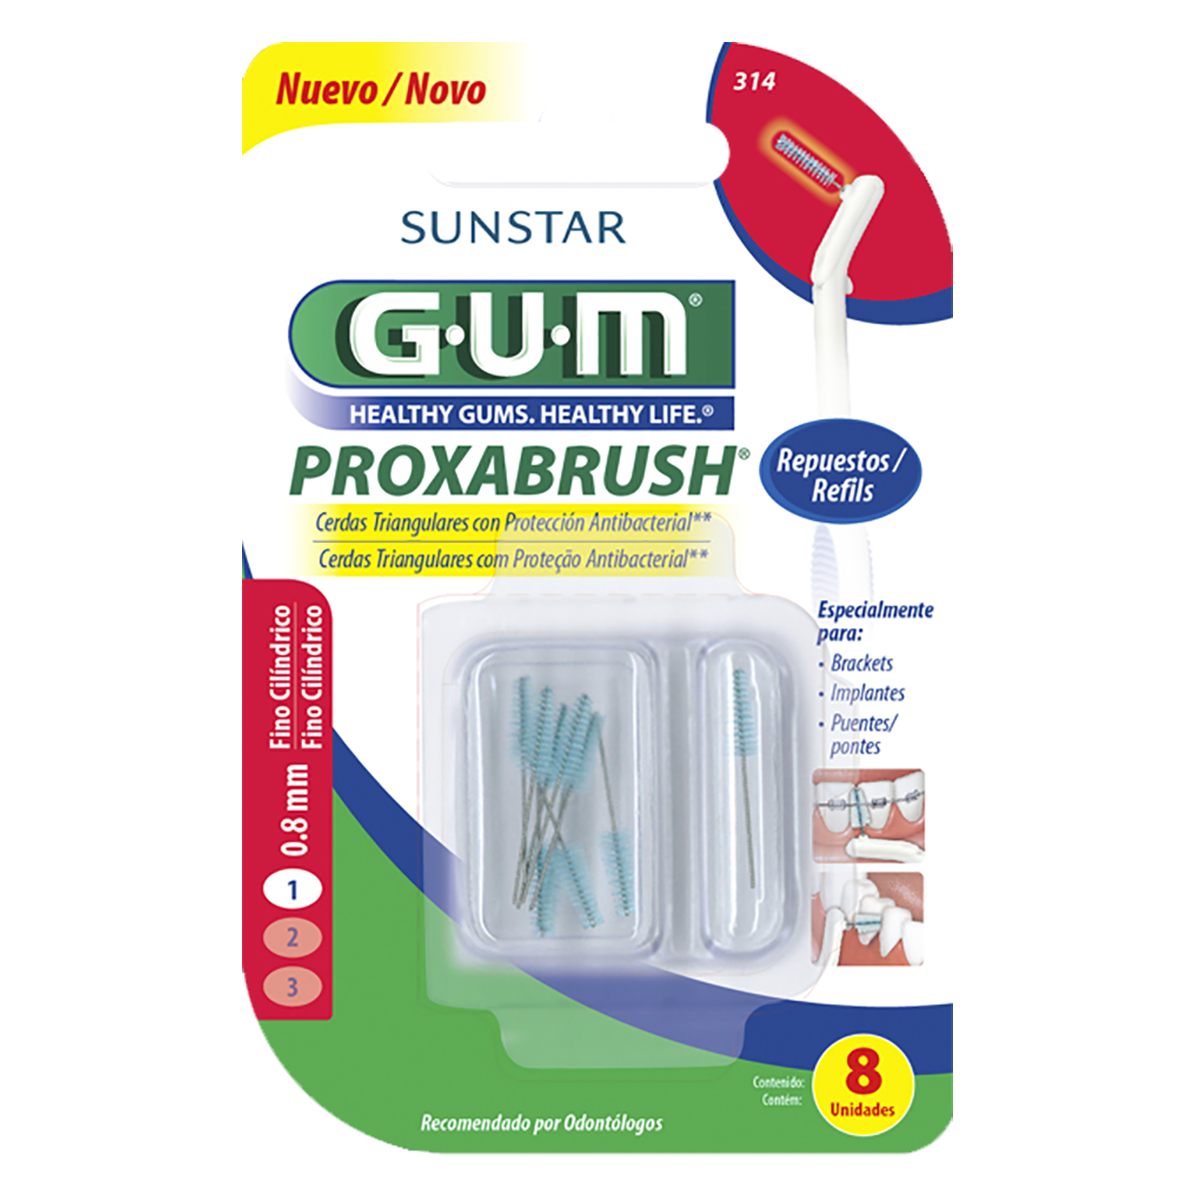 314LA-Product-Packaging-BTC-Interdental-Proxabrush-Refills-Fine-front-8ct.png